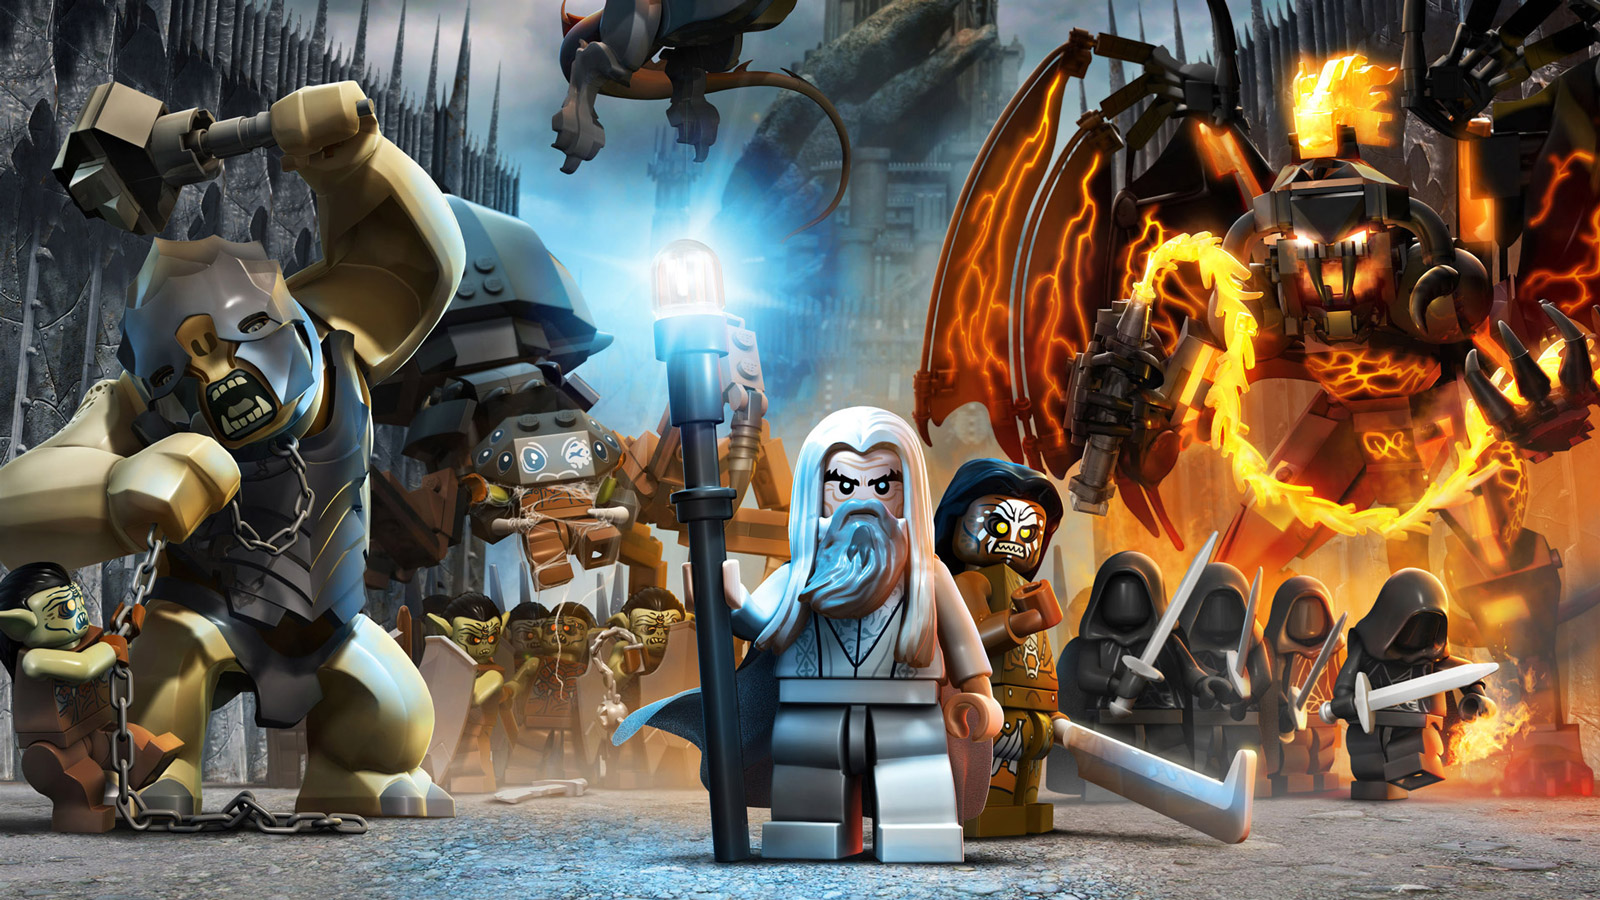 lego lord of the rings pc download